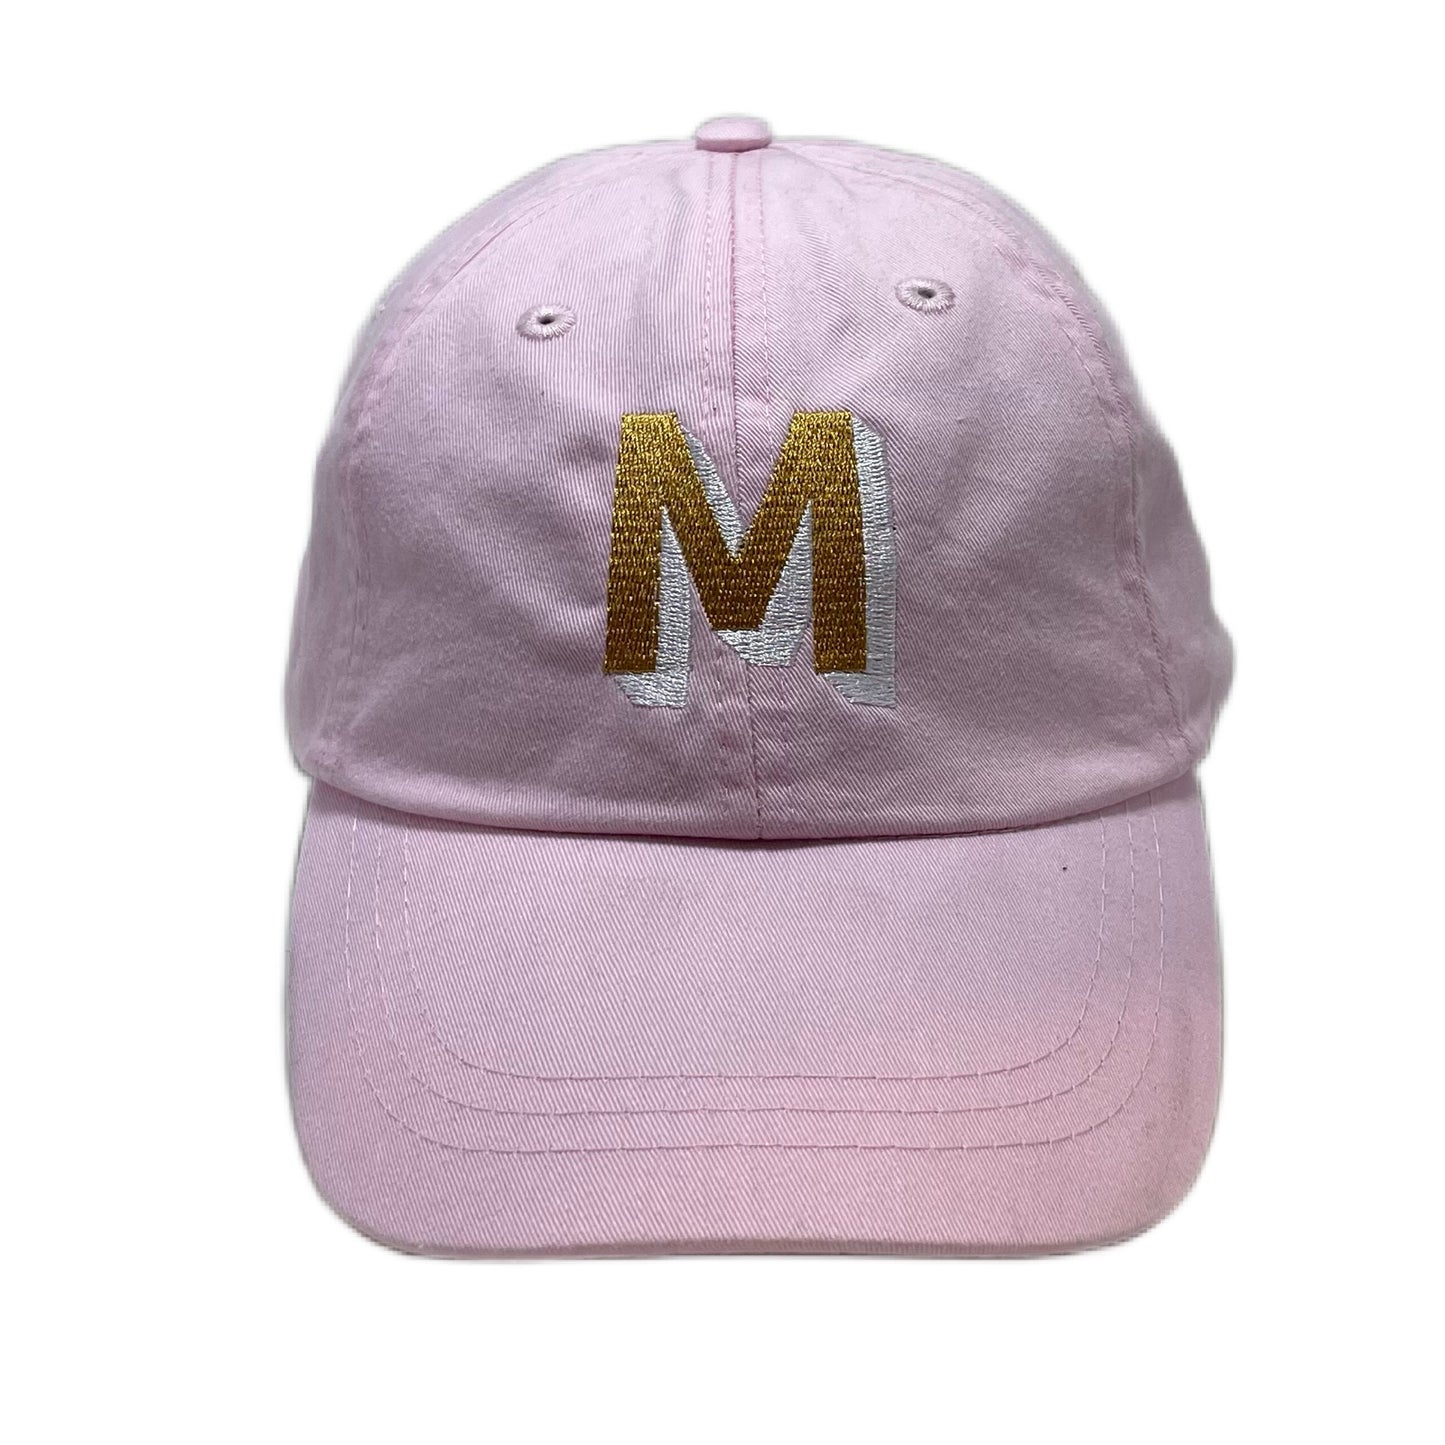 Black Dad Hat - Pink & White Shadow Block Lettering